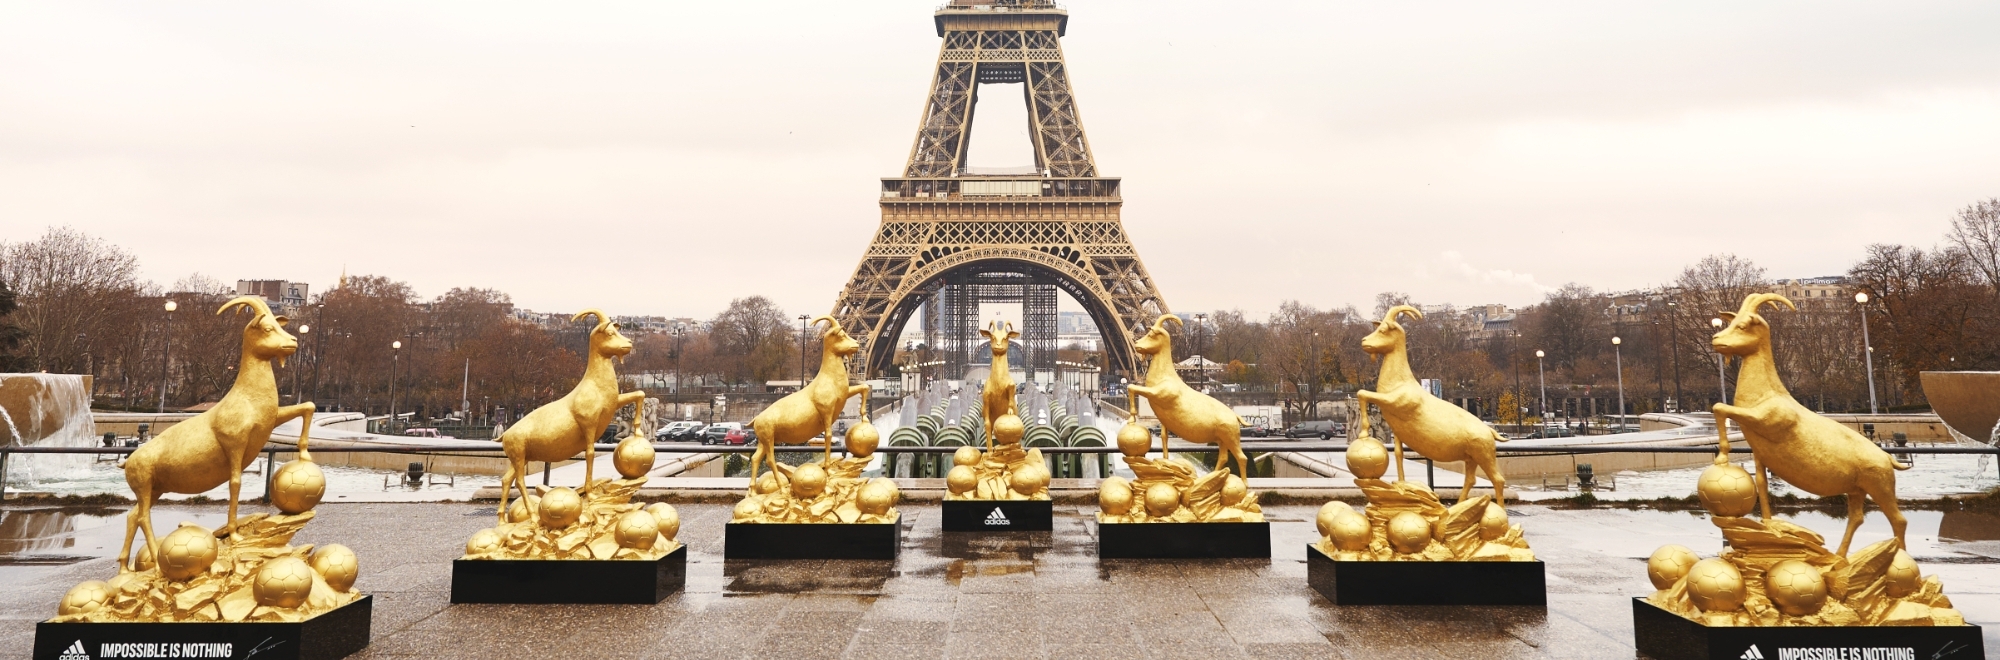 Golden goats placed at Paris landmarks to celebrate Messi's 7th win as the best footballer in the world